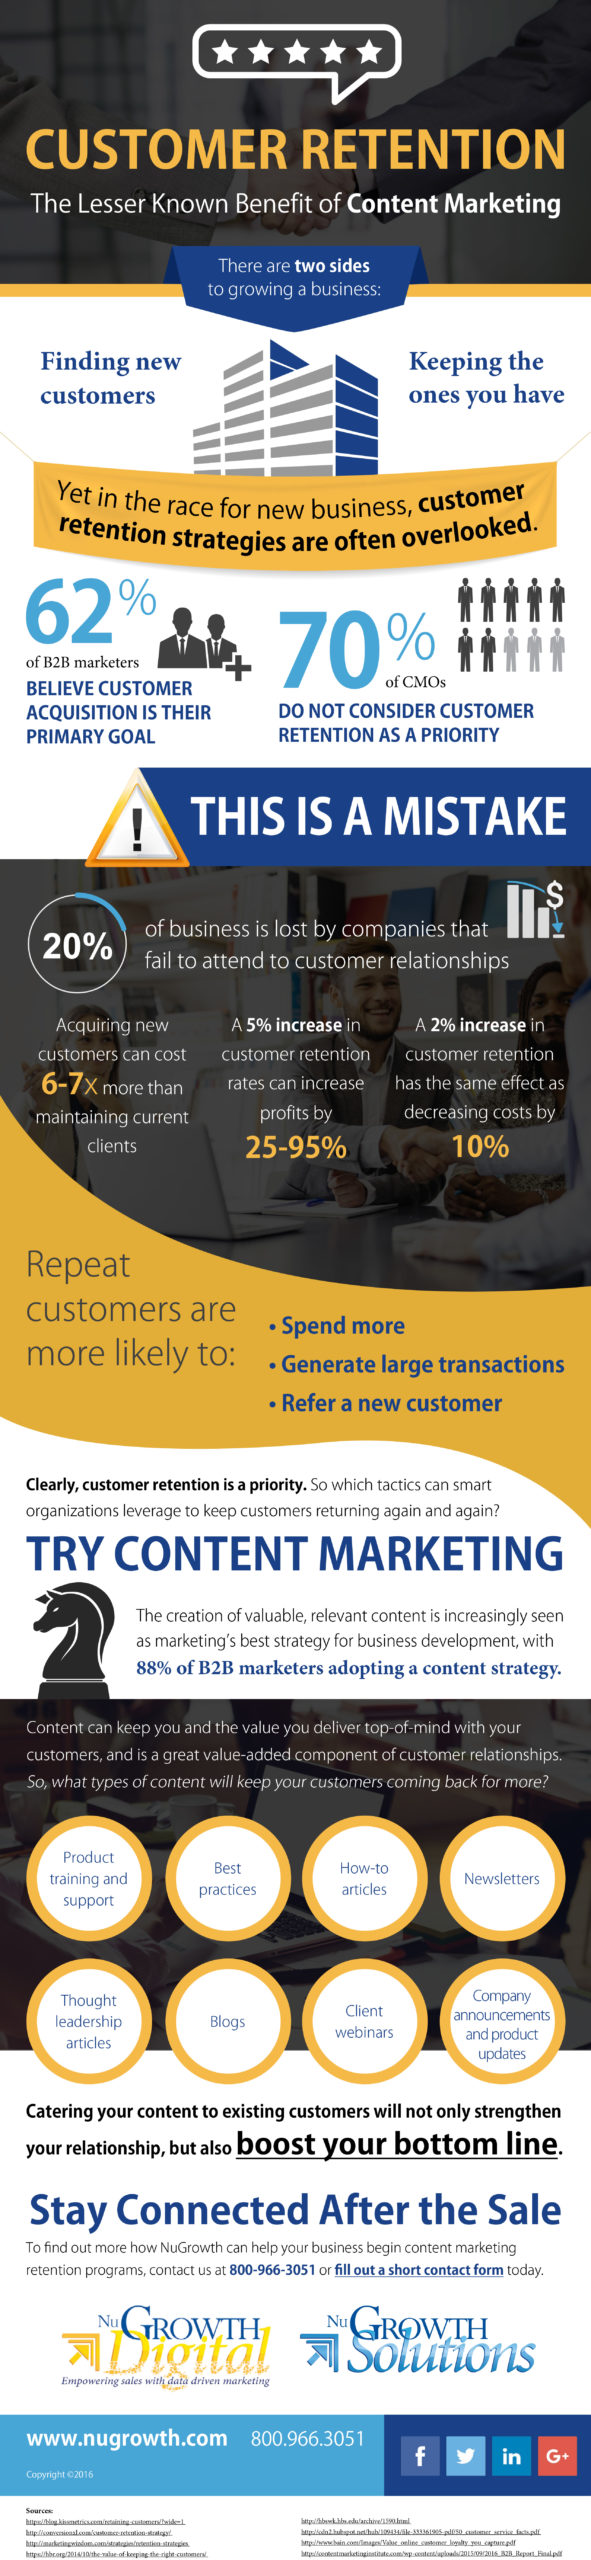 Customer-Retention-the-Lesser-Known-Benefit-of-Content-Marketing